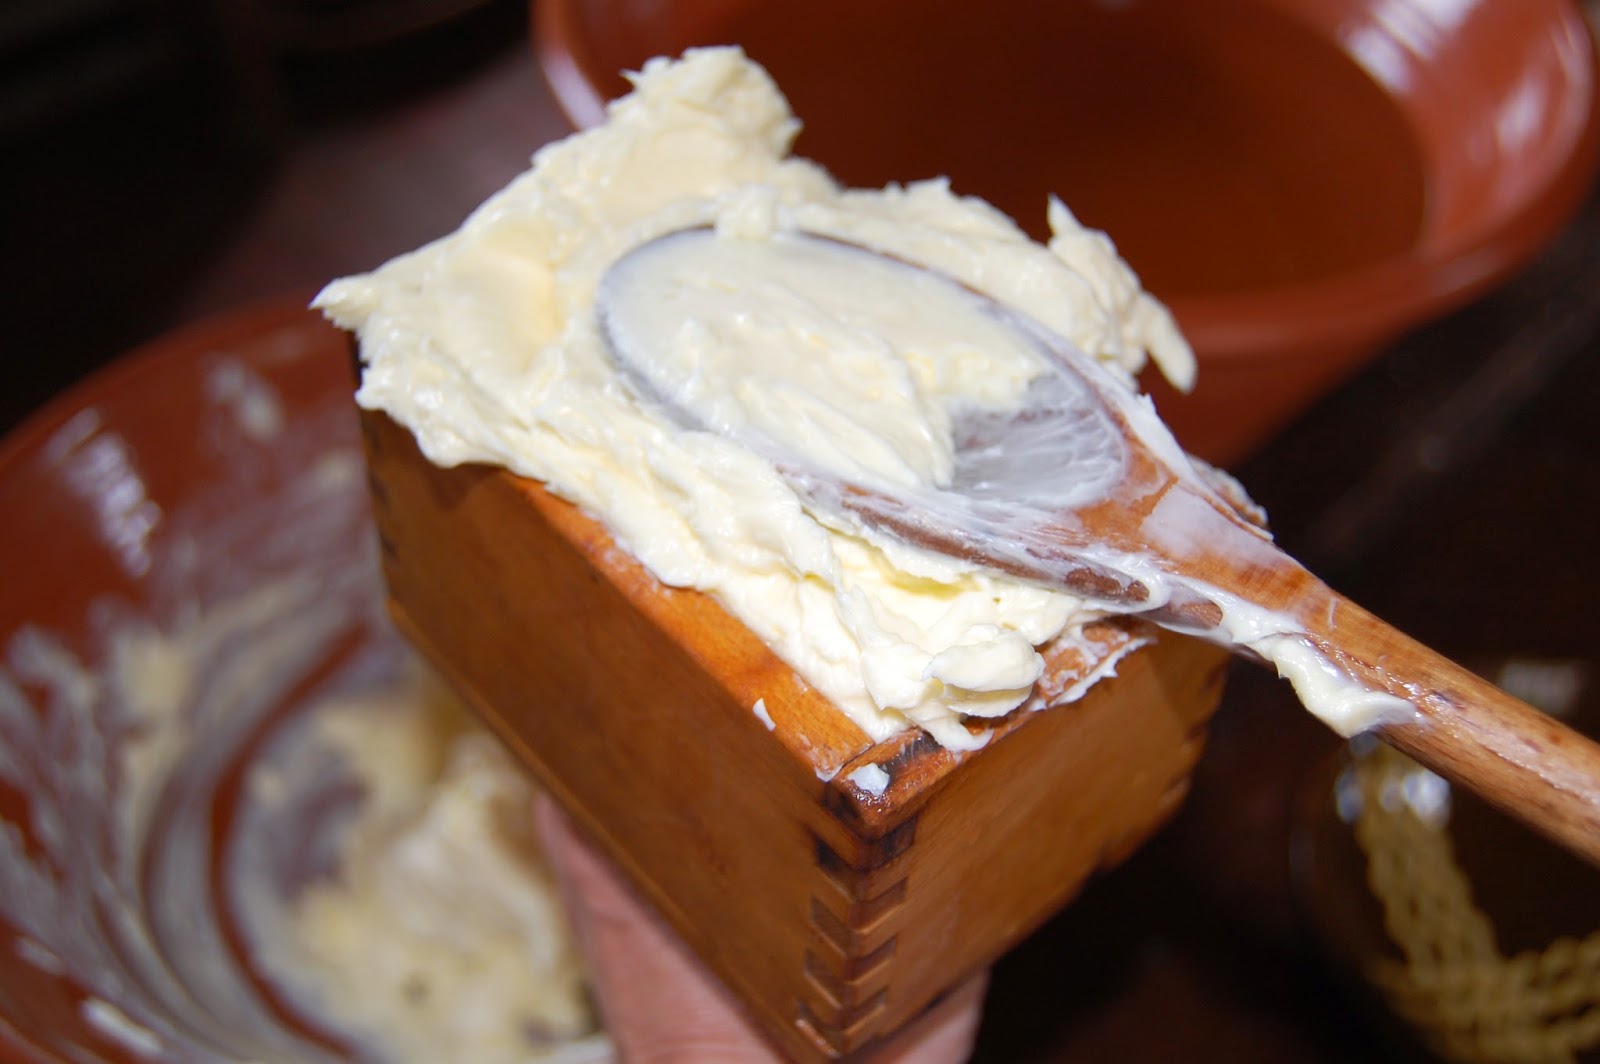 Sew Historicaland other fun stuff: How To Use Wooden Butter Molds